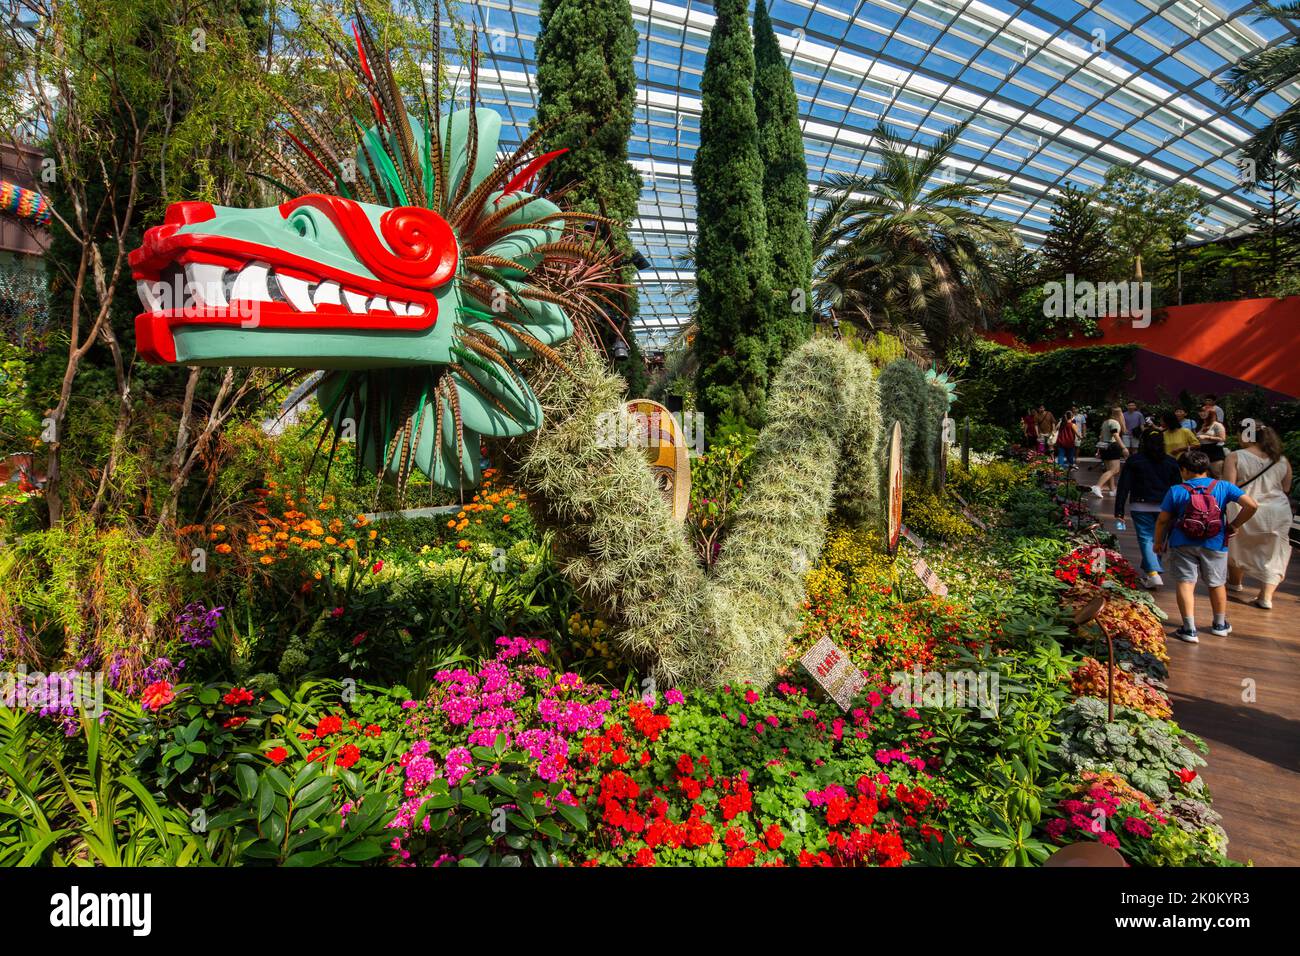 The Aztec double-headed serpent, Mexican showcases vibrant floral interpretations and icons of ancient Mexican civilisations. Gardens by the Bay. Stock Photo